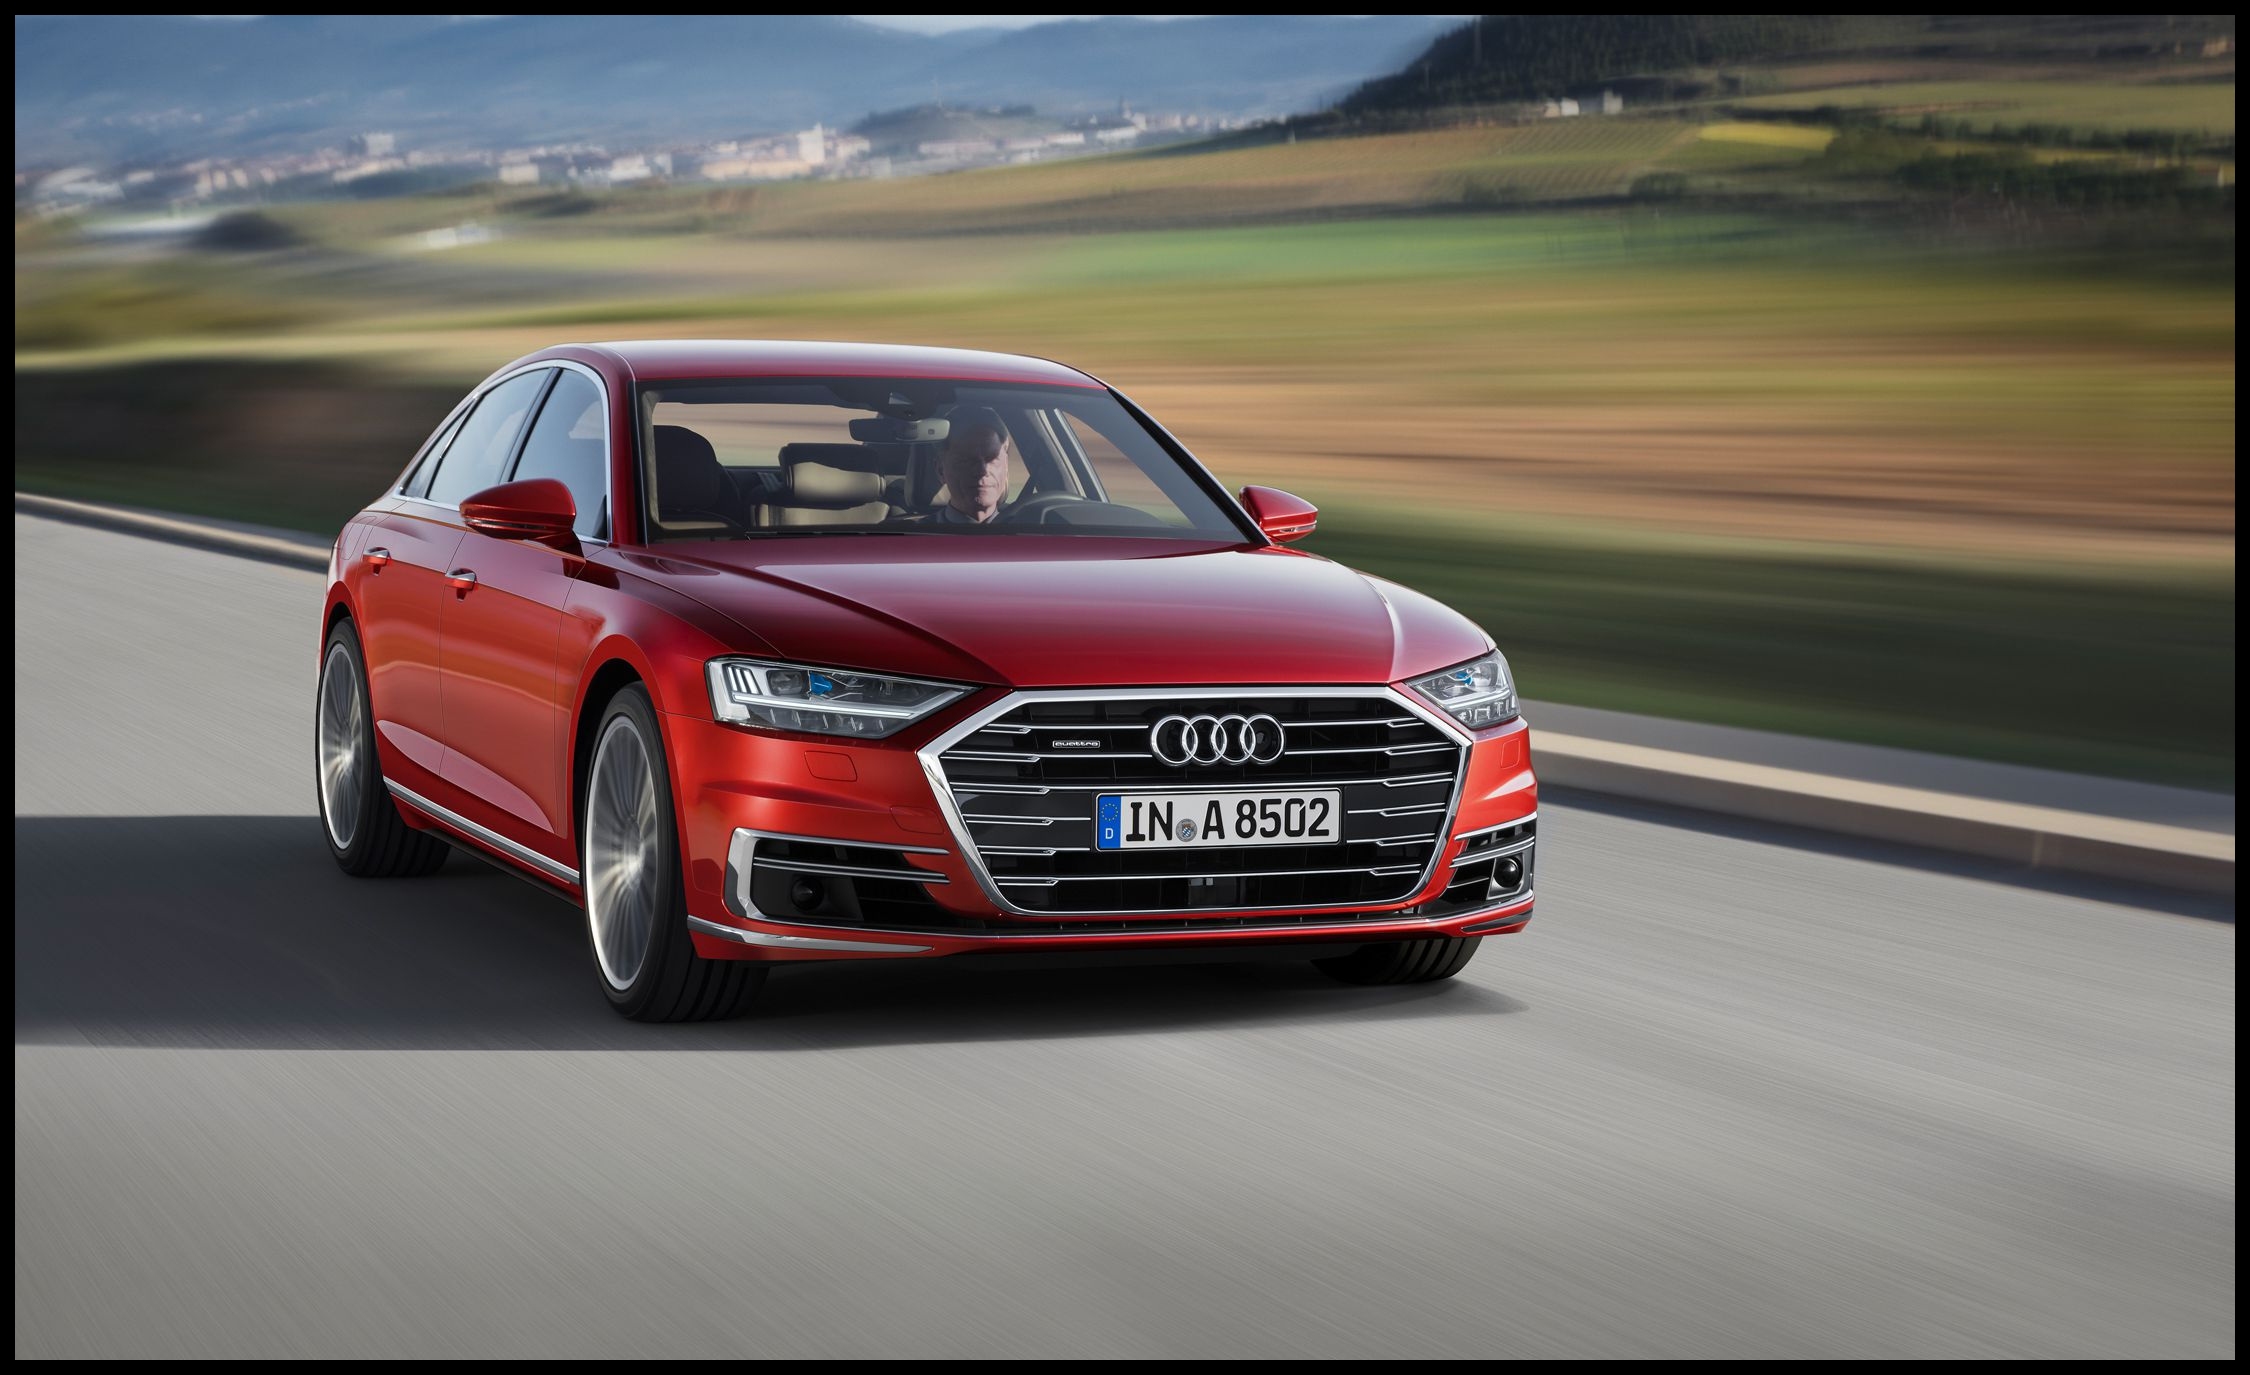 2018 Audi A8l Prices Reviews and 2014 Audi A8l Tdi Diesel Test Review Redesign